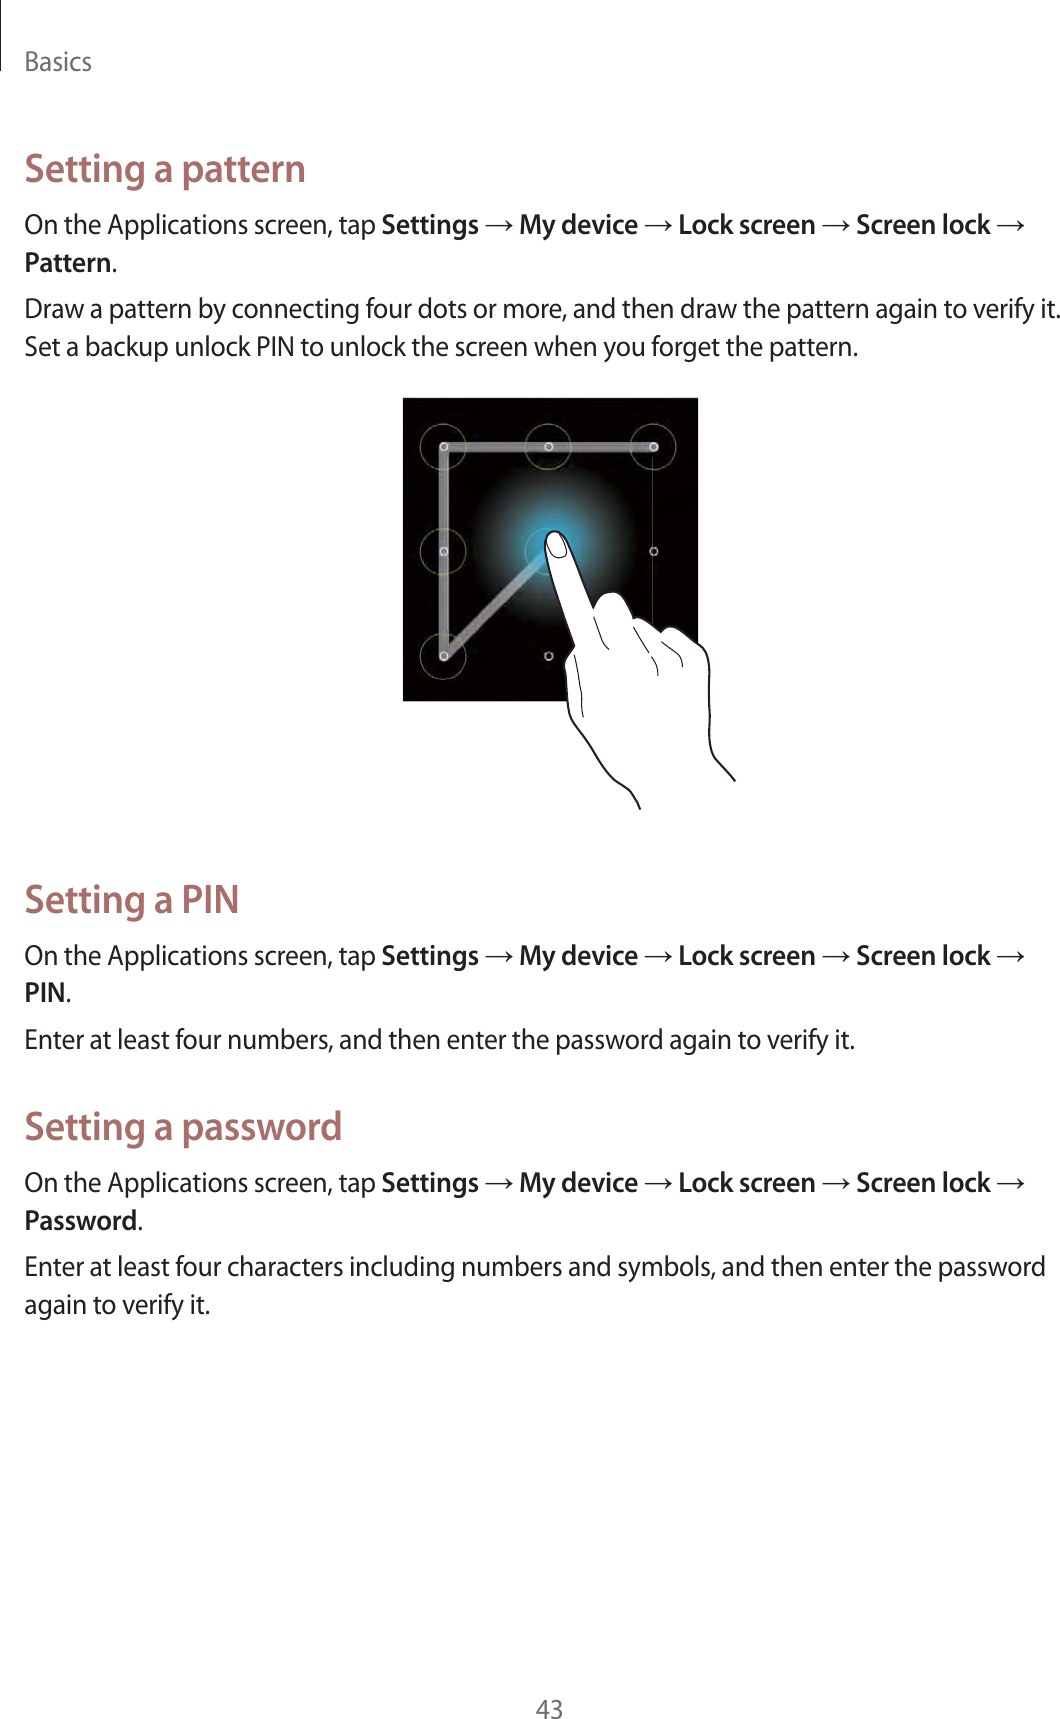 Basics43Setting a patternOn the Applications screen, tap Settings  My device  Lock screen  Screen lock  Pattern.Draw a pattern by connecting four dots or more, and then draw the pattern again to verify it. Set a backup unlock PIN to unlock the screen when you forget the pattern.Setting a PINOn the Applications screen, tap Settings  My device  Lock screen  Screen lock  PIN.Enter at least four numbers, and then enter the password again to verify it.Setting a passwordOn the Applications screen, tap Settings  My device  Lock screen  Screen lock  Password.Enter at least four characters including numbers and symbols, and then enter the password again to verify it.